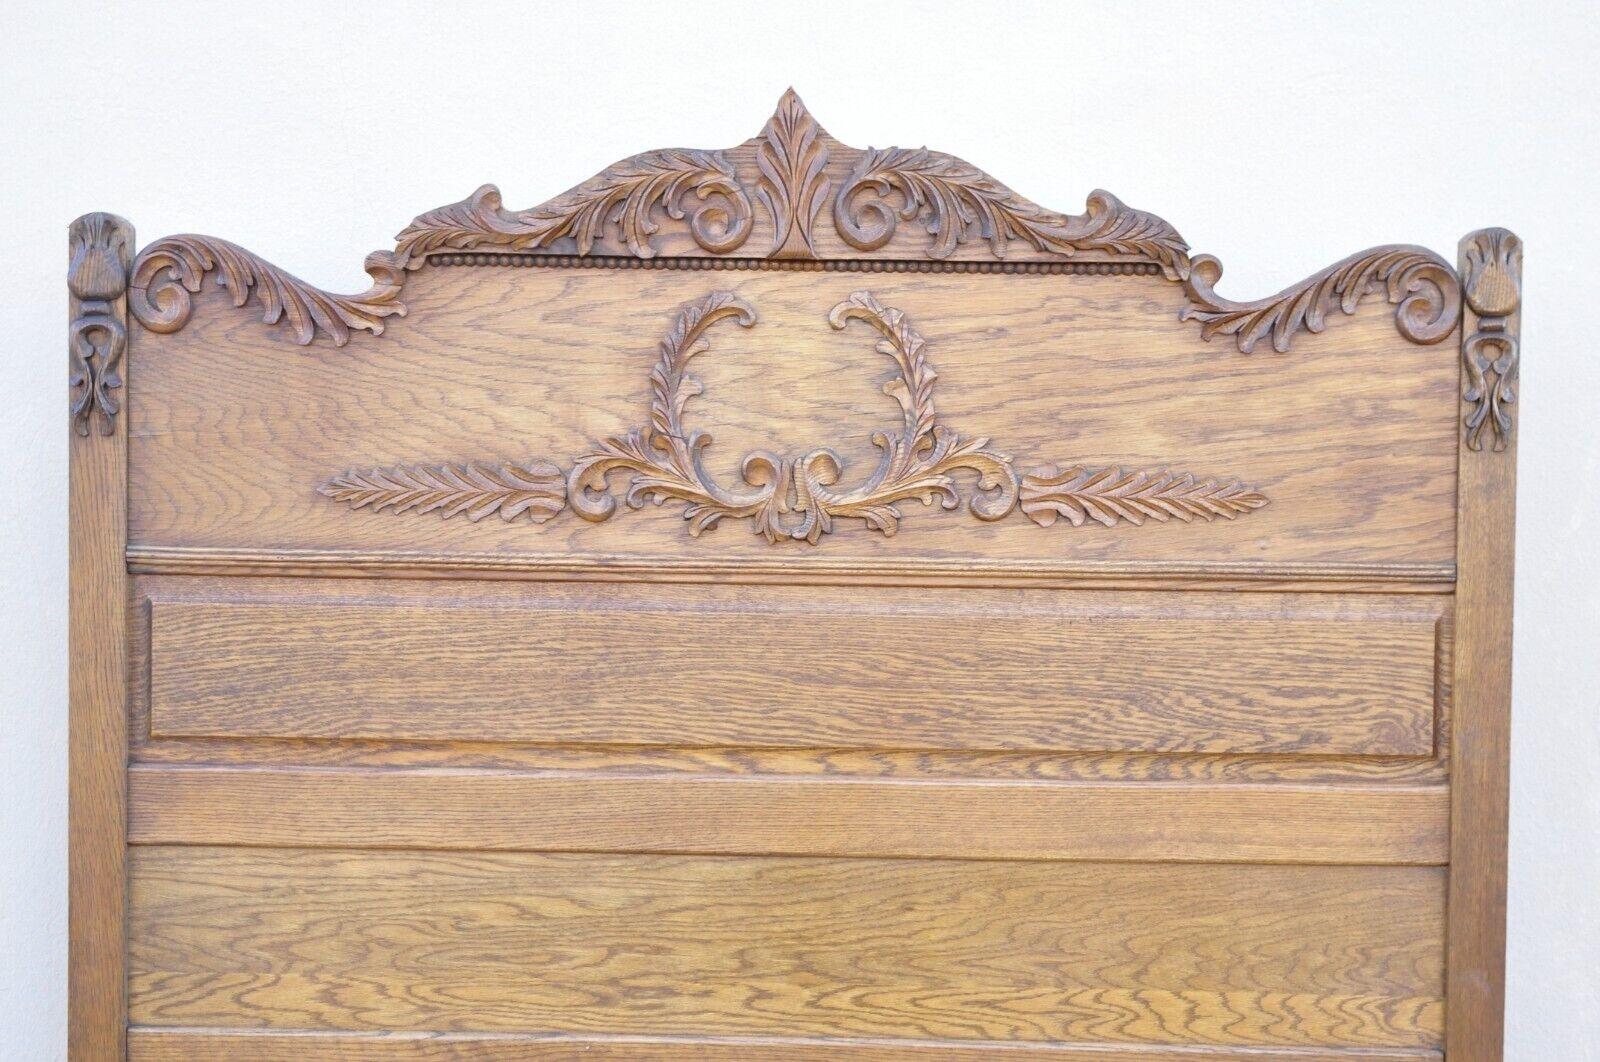 Antique Eastlake Victorian Oak Wood Tall Headboard Full Size Bed Frame In Good Condition For Sale In Philadelphia, PA